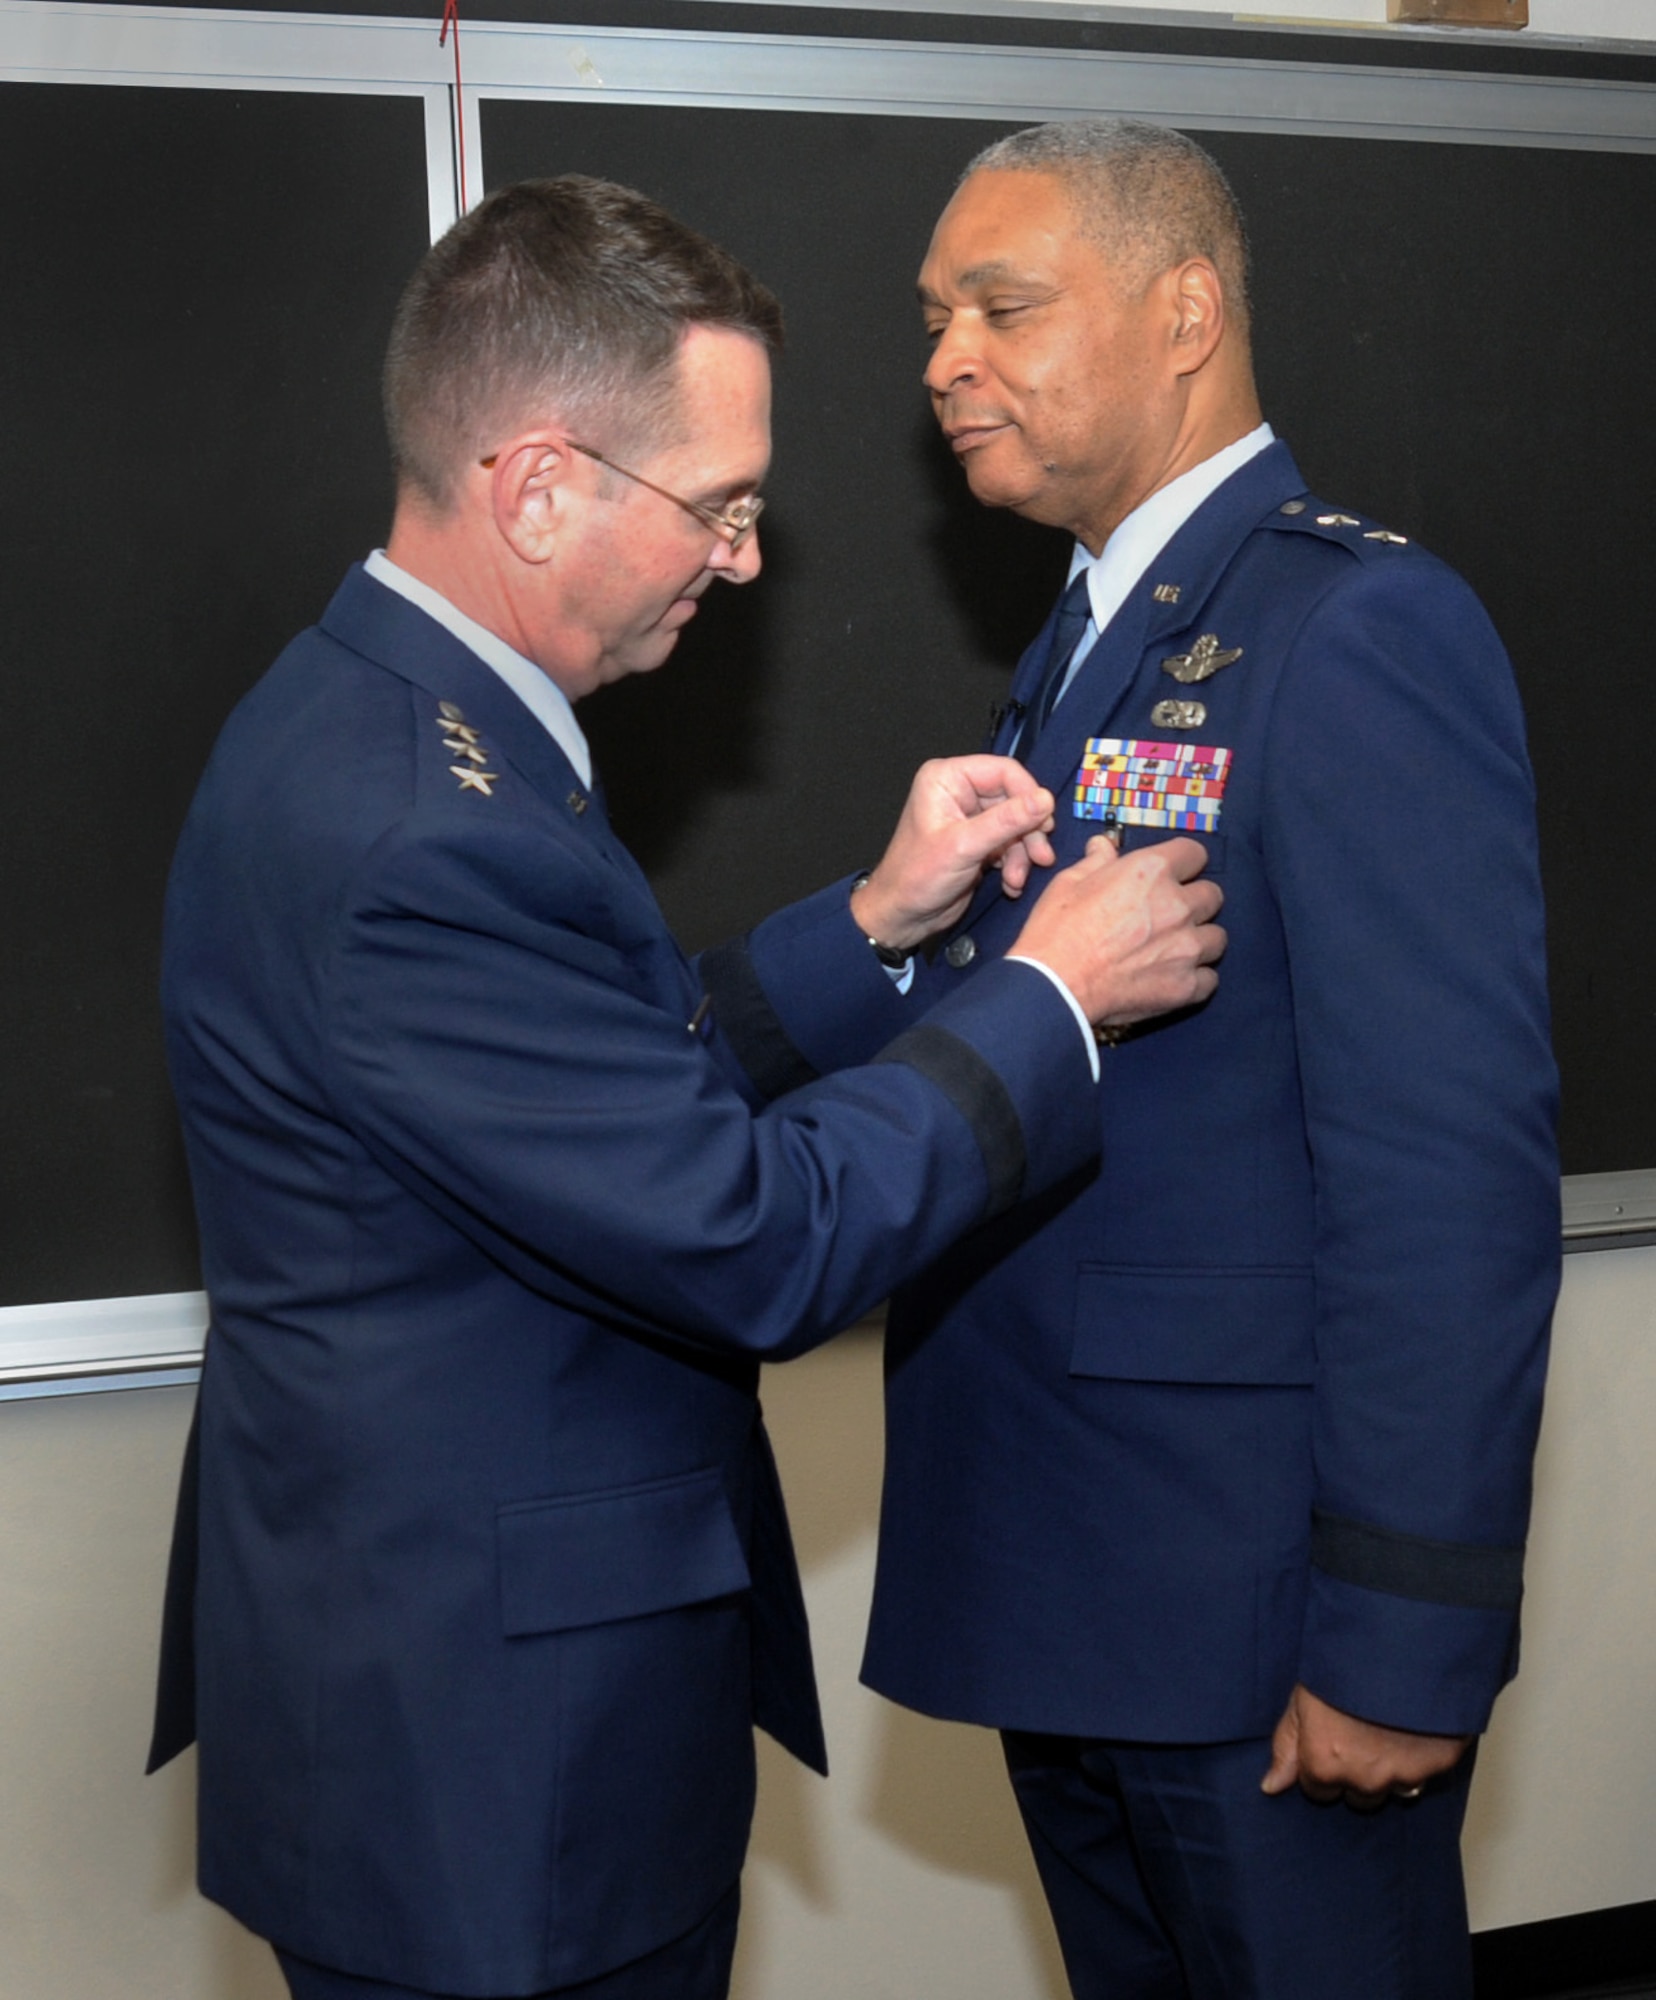 U.S. Air Force Lt. Gen. Joseph L. Lengyel, Vice Chief, National Guard Bureau, left, presents The Distinguished Service Medal to Maj. Gen. Garry Dean, The Special Assistant to the Chief, National Guard Bureau, right, during his formal retirement ceremony held at the Portland Air National Guard Base, Ore., Dec. 6, 2015. (U.S. Air National Guard photo by Tech. Sgt. John Hughel, 142nd Fighter Wing Public Affairs) 